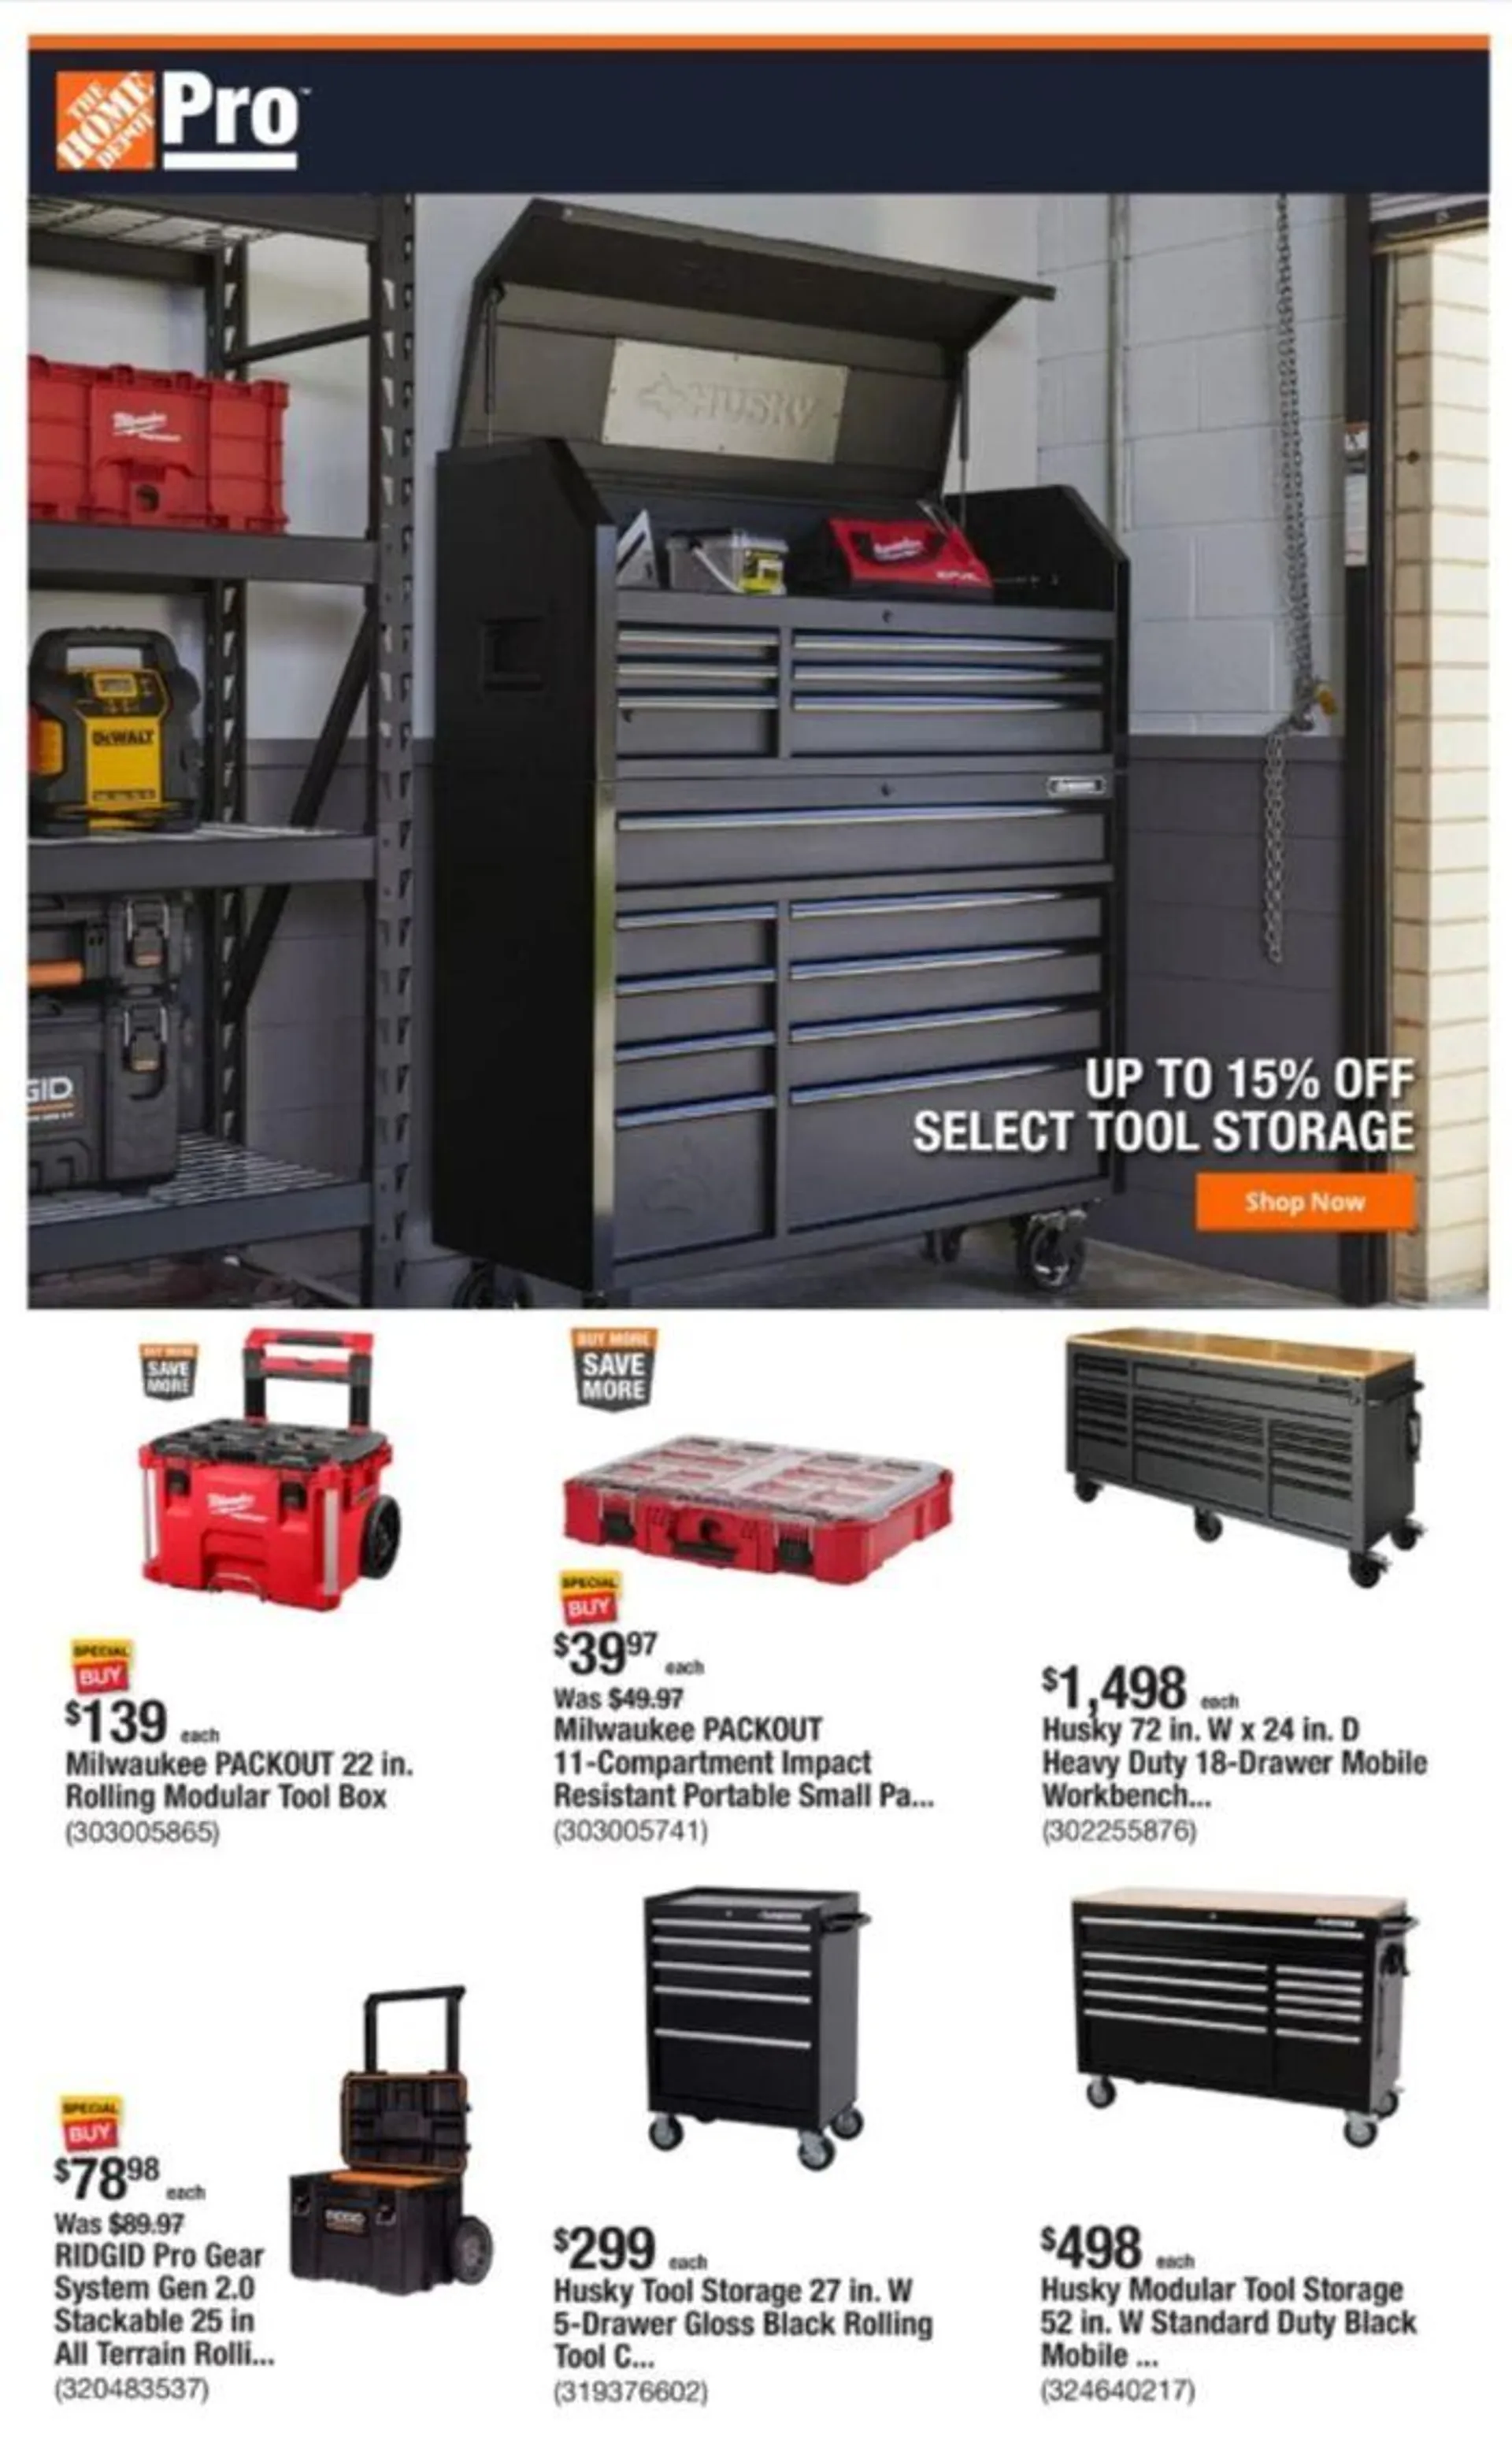 Up To 15% Off Select Tool Storage - 1